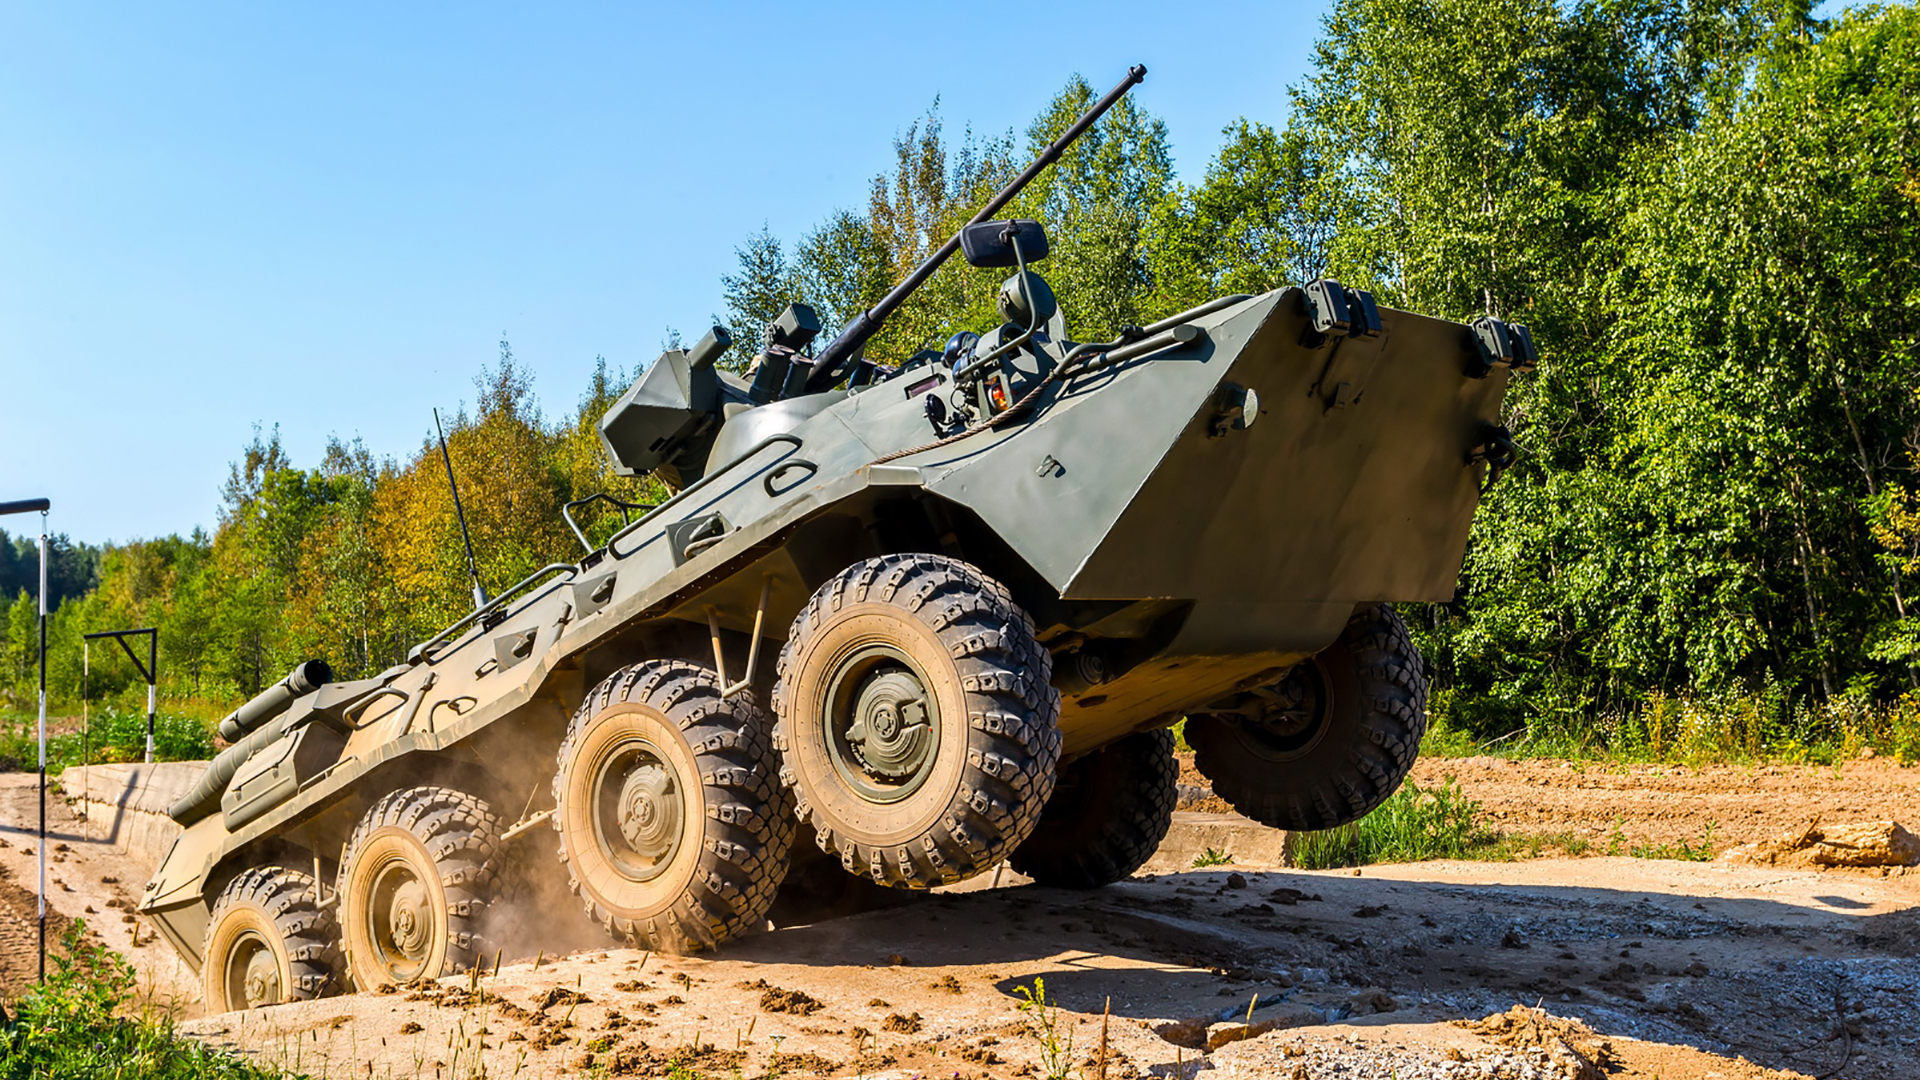 BTR 80 Vehicle Armored Personnel Carrier 1920x1080